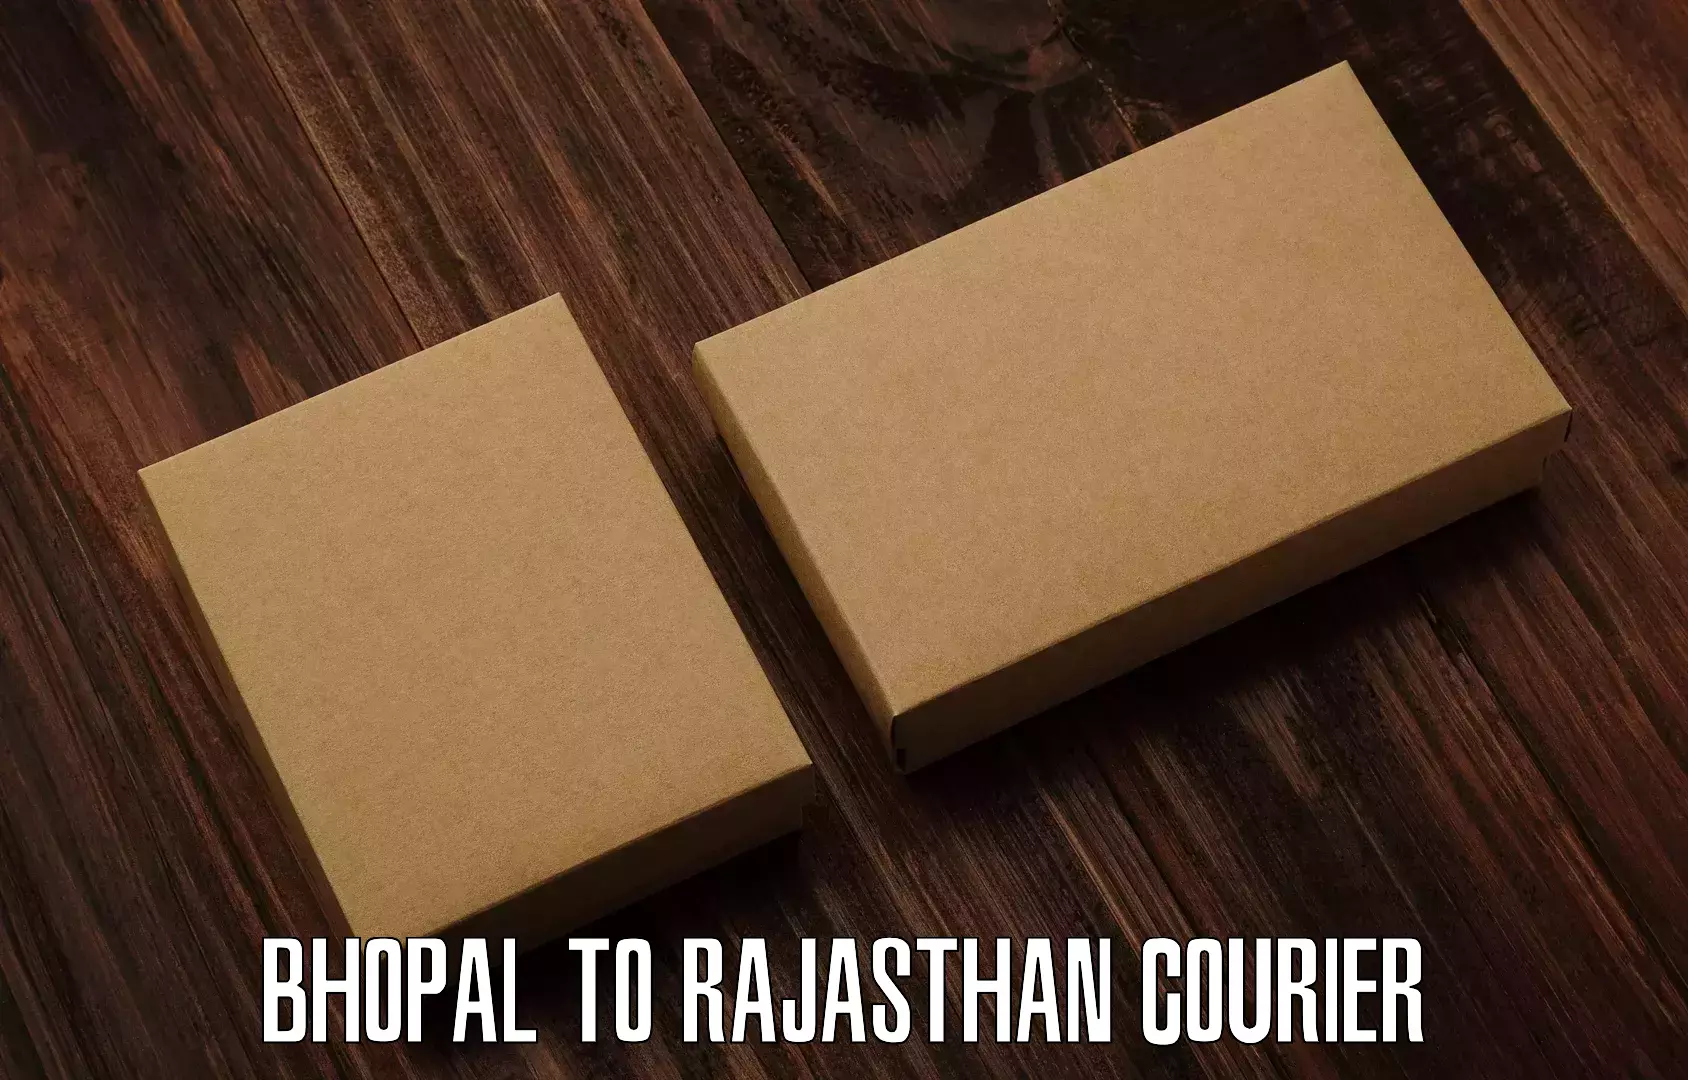 Doorstep delivery service Bhopal to Bassi